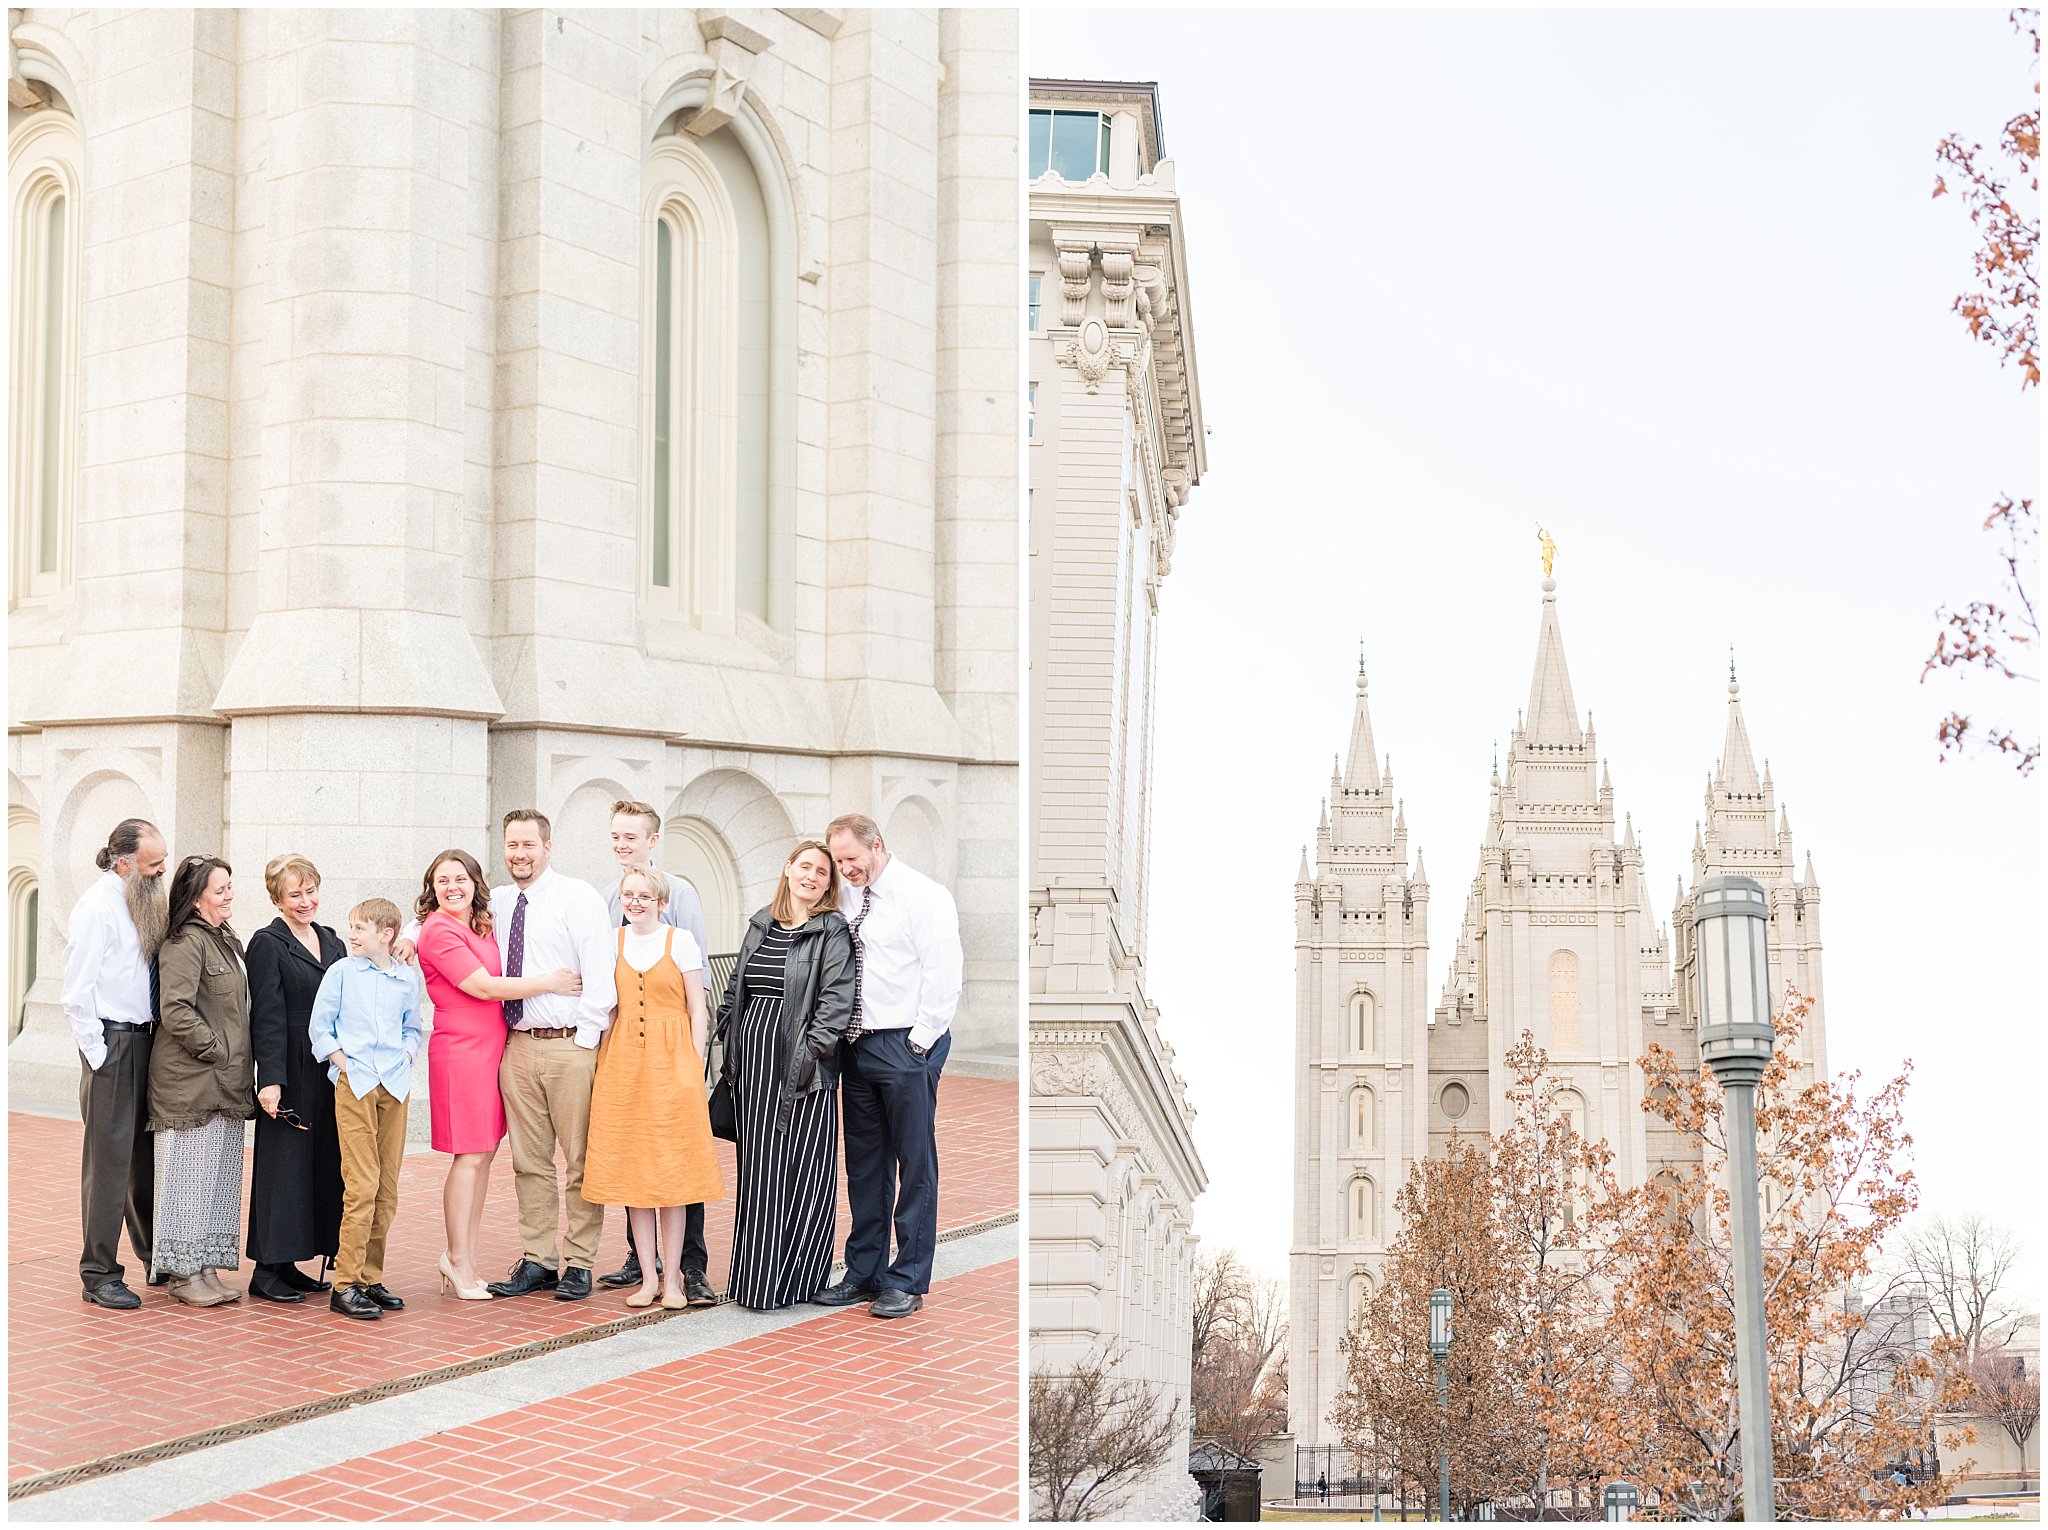 Family pictures at the Salt Lake Temple | Salt Lake Temple Sealing | Jessie and Dallin Photography